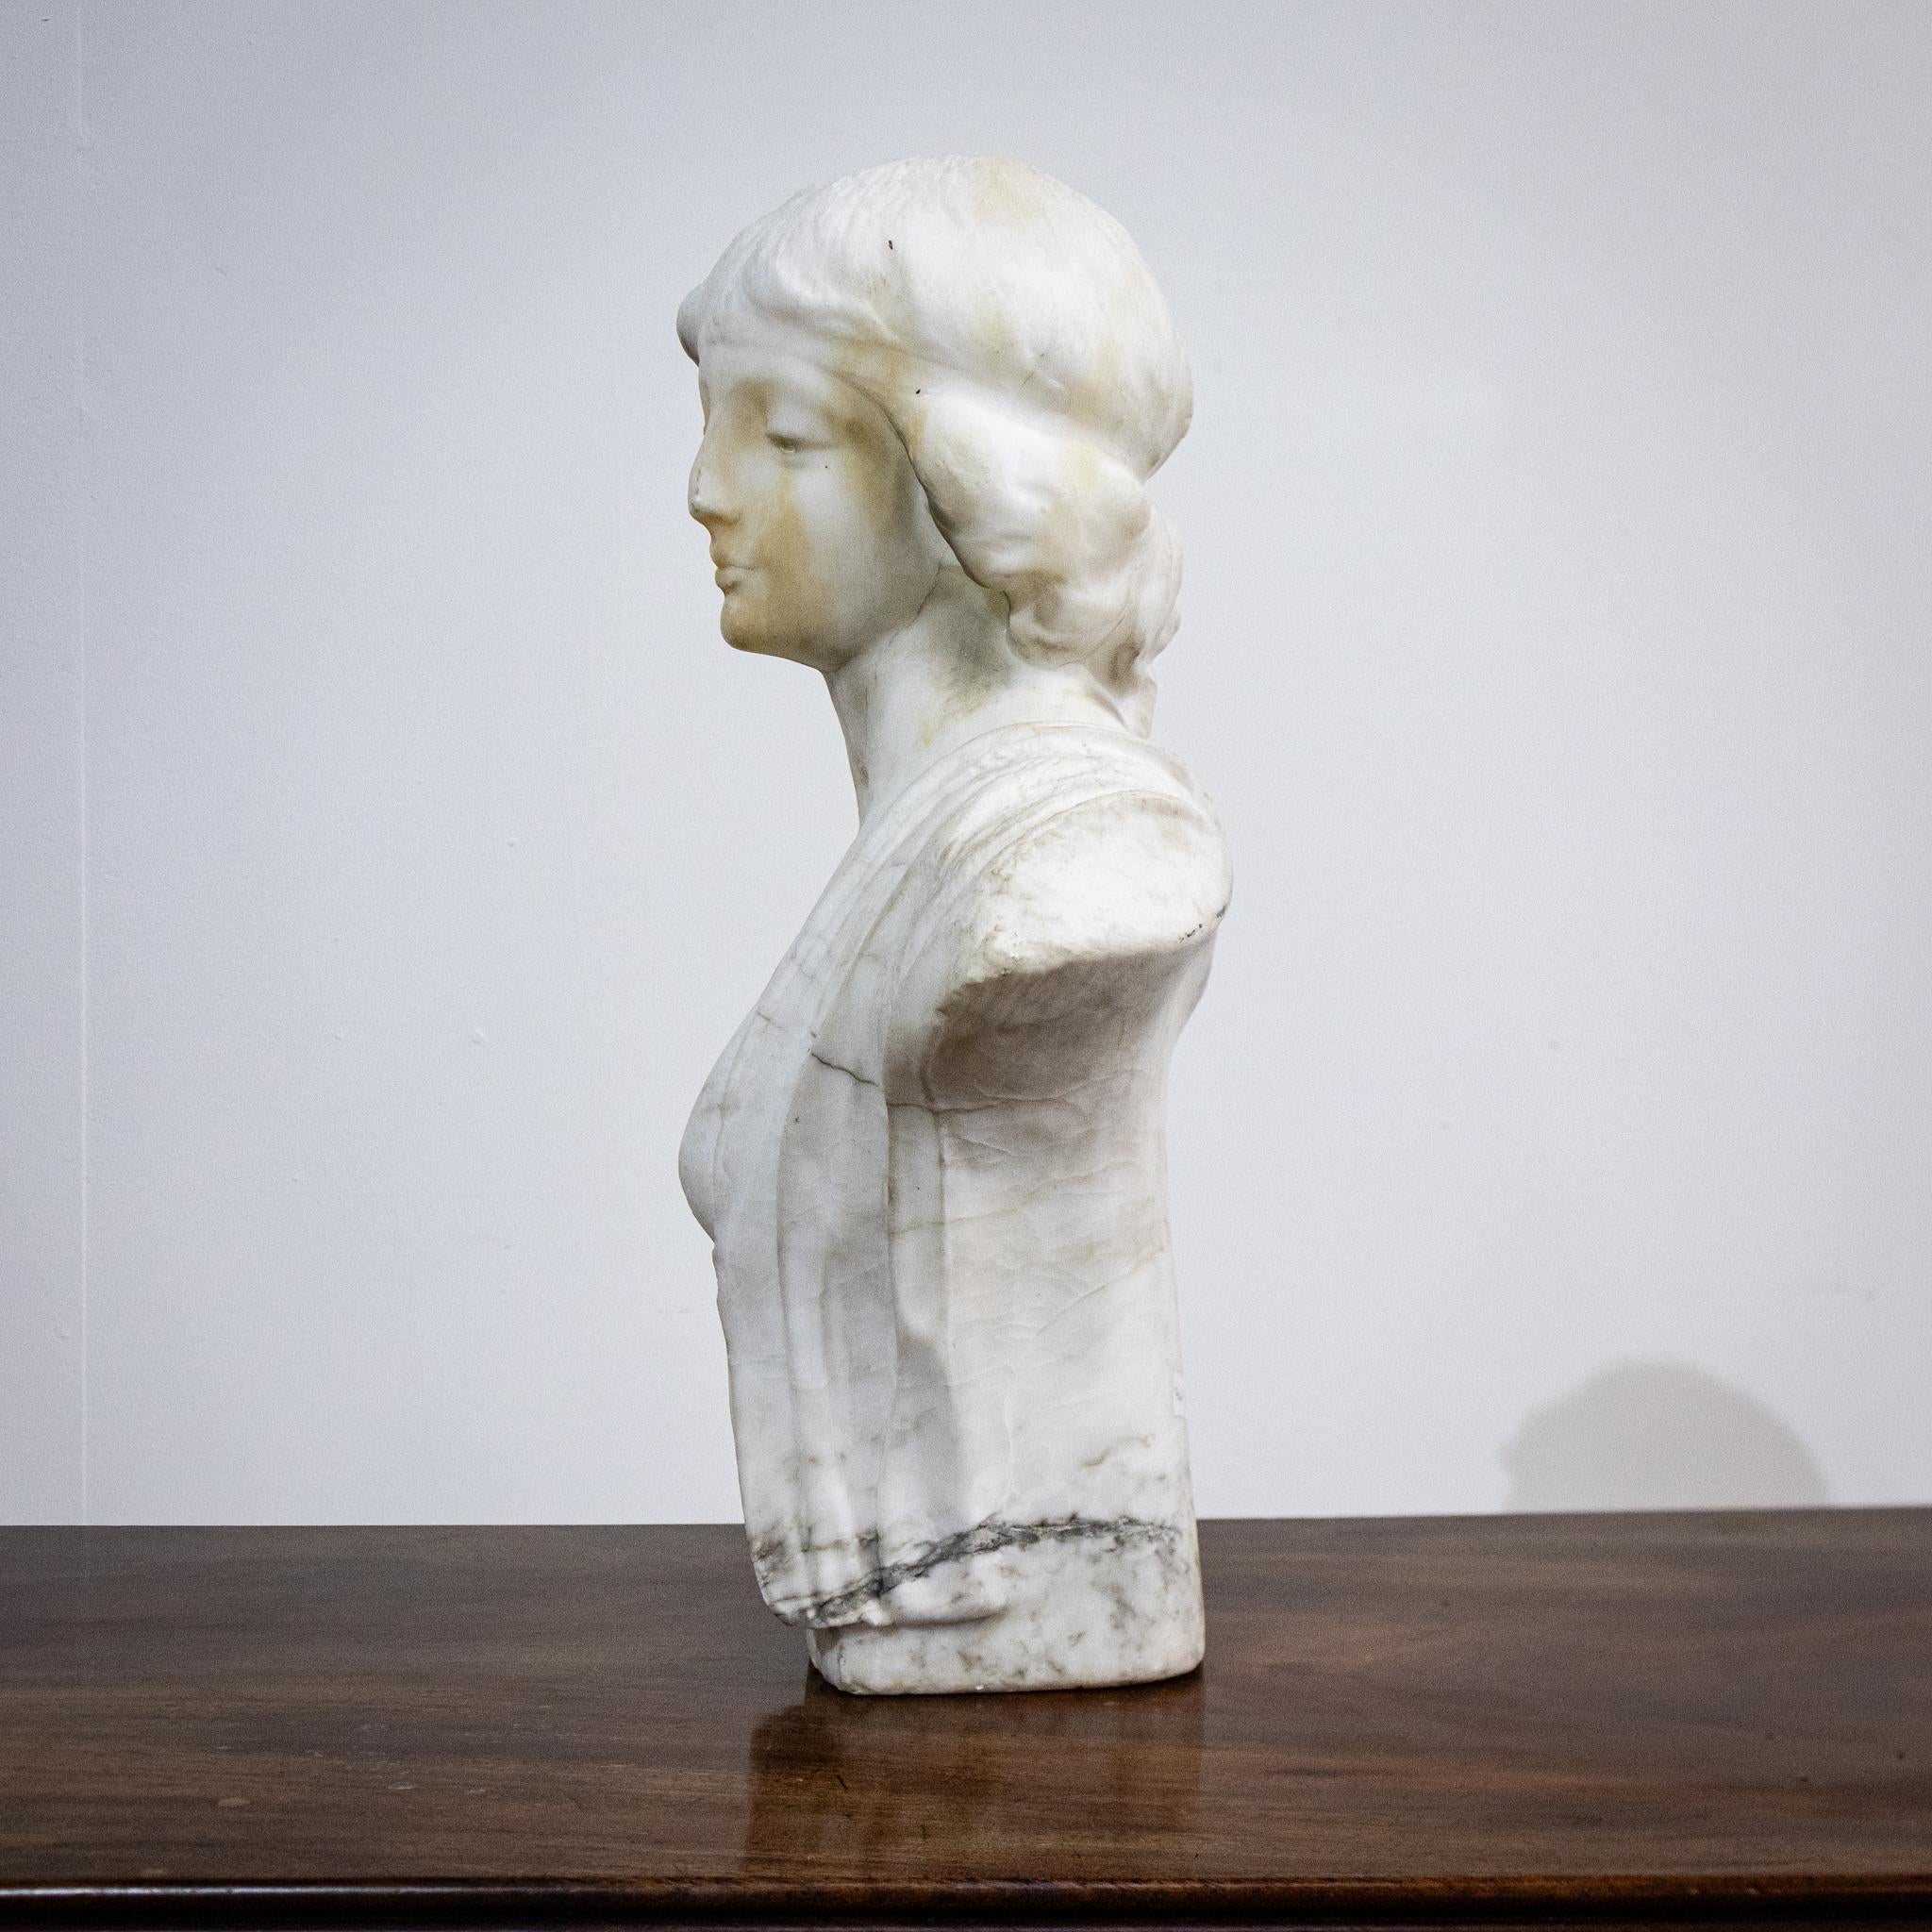 This lovely quality alabaster figure is of a young woman with beautifully sculpted hair, features and clothing folds. The head appears to have been carved separately from the body and there is a joint around the neckline of the dress, although there